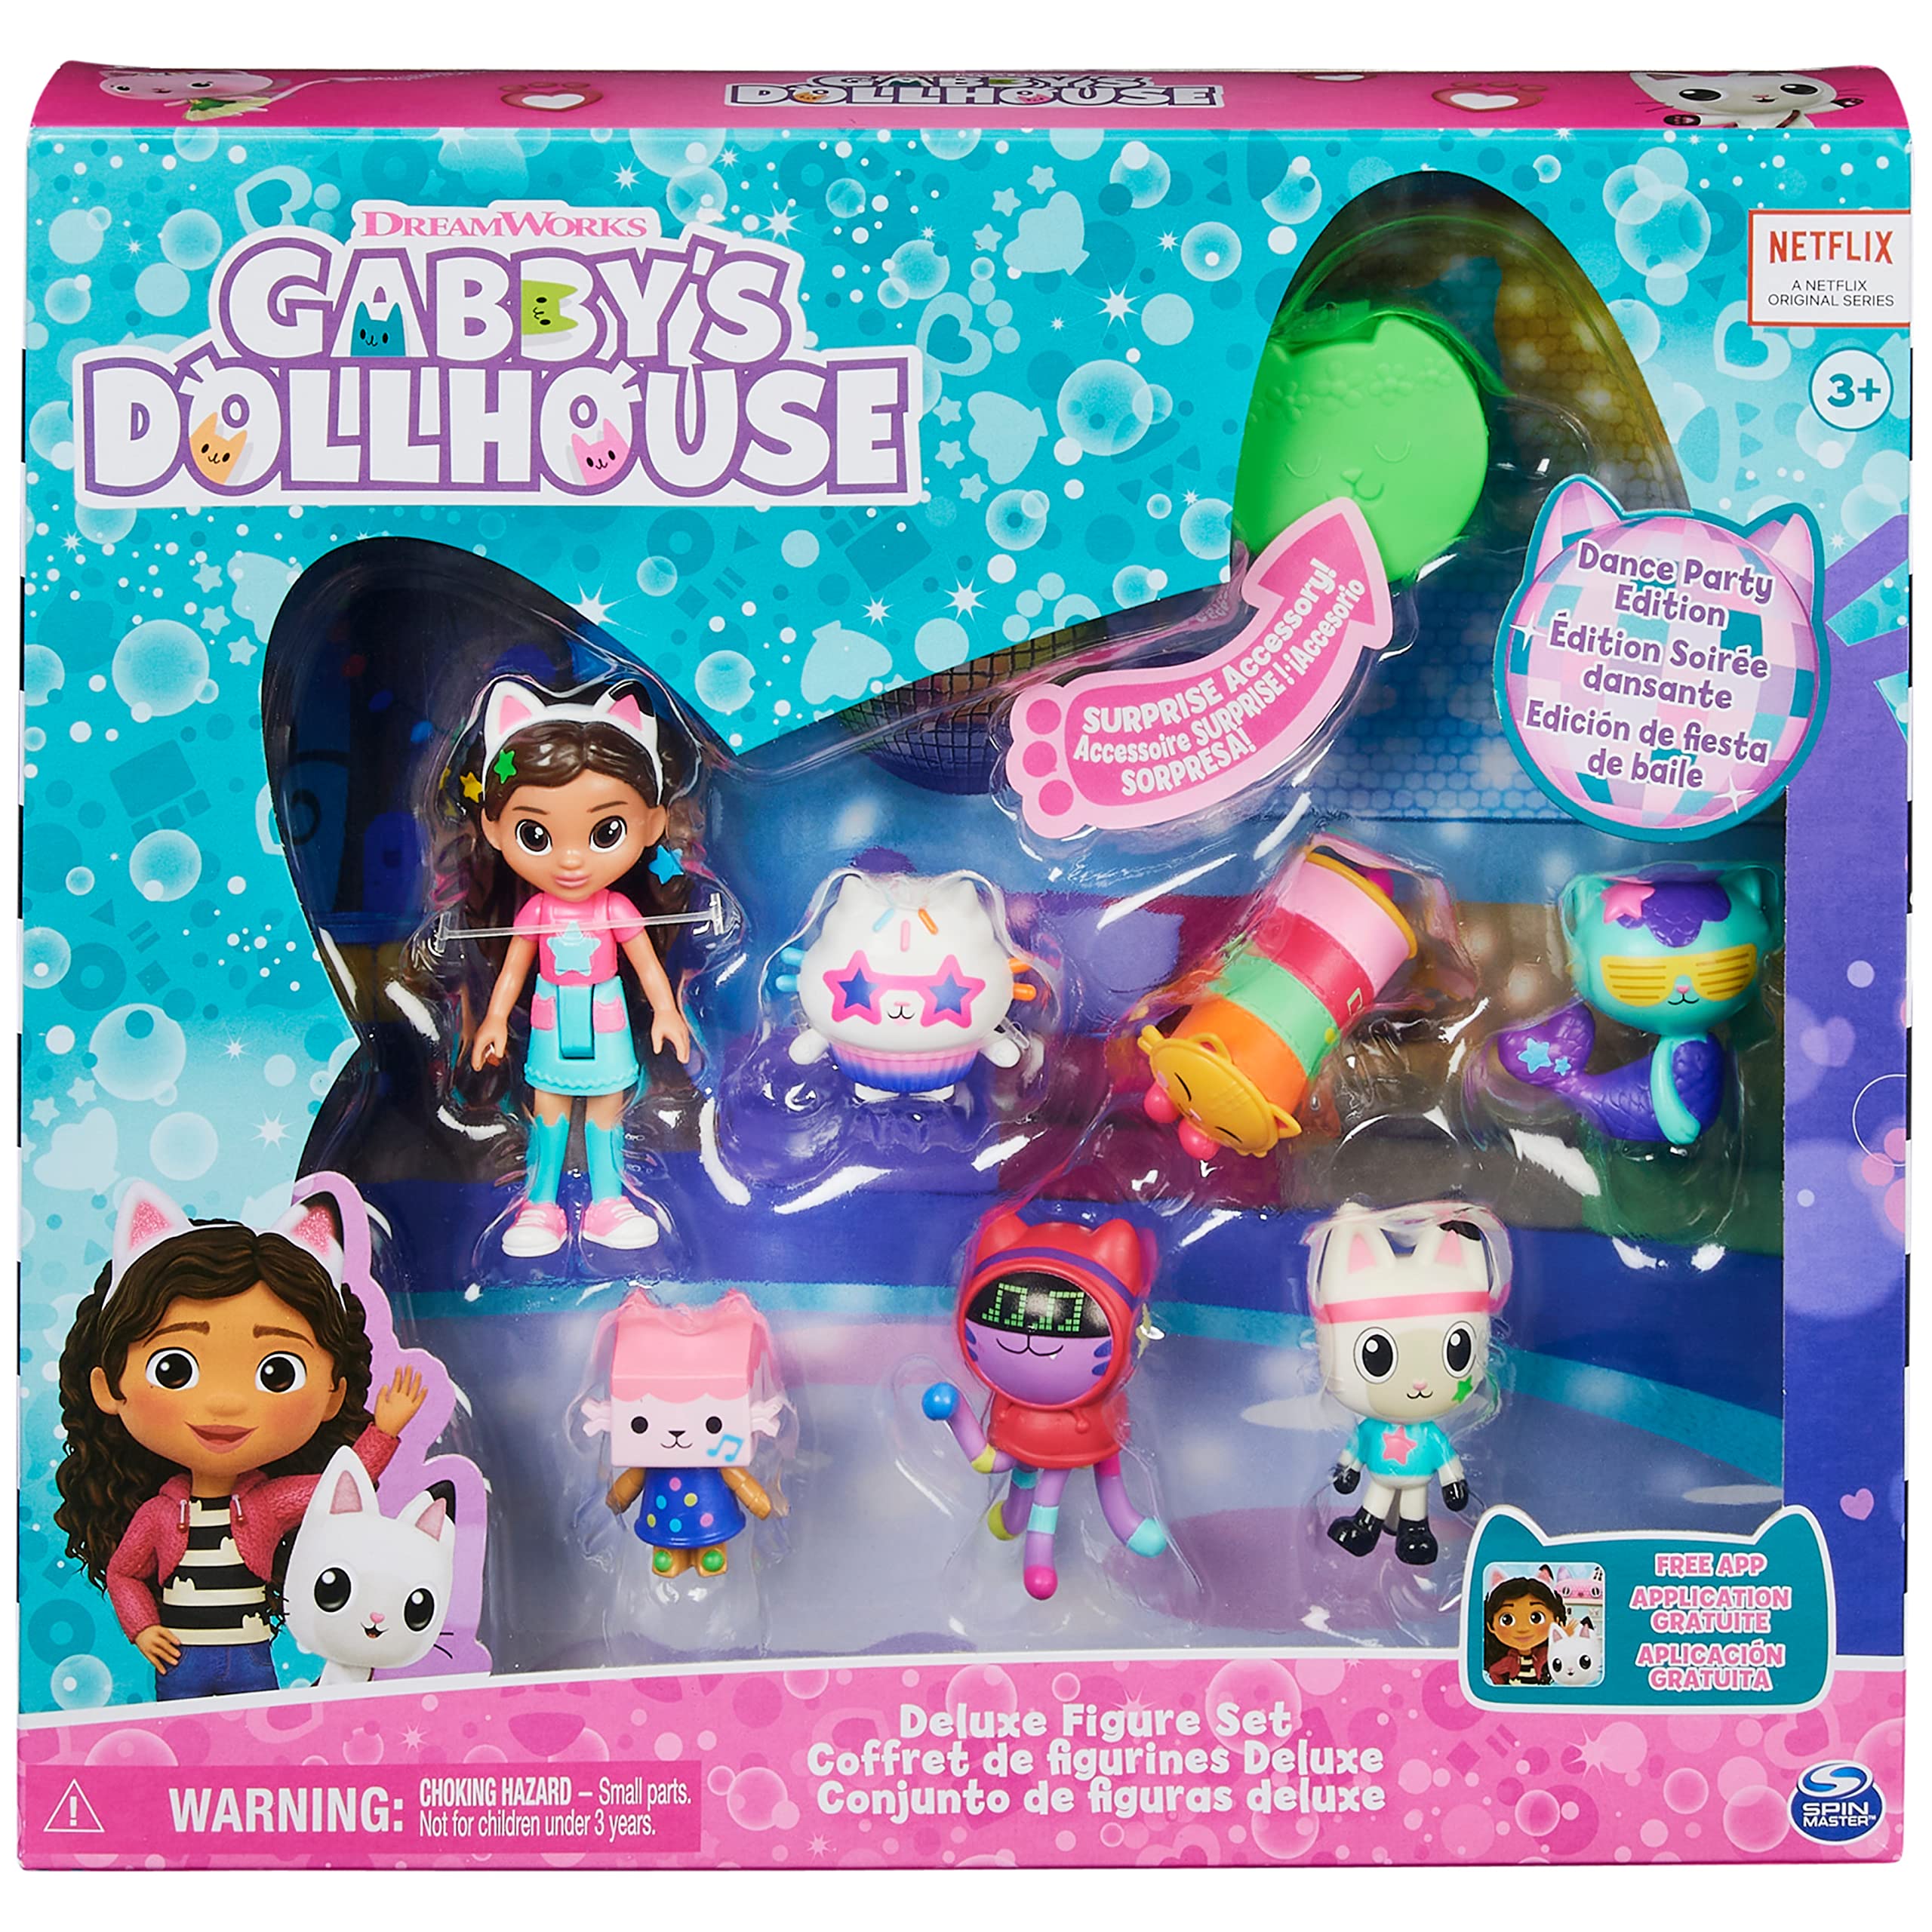 Gabby's Dollhouse Dance Party Theme Figure Set w/ Gabby Doll, 6 Cat Toy Figures & Accessories $9 + Free Shipping w/ Prime or on $25+